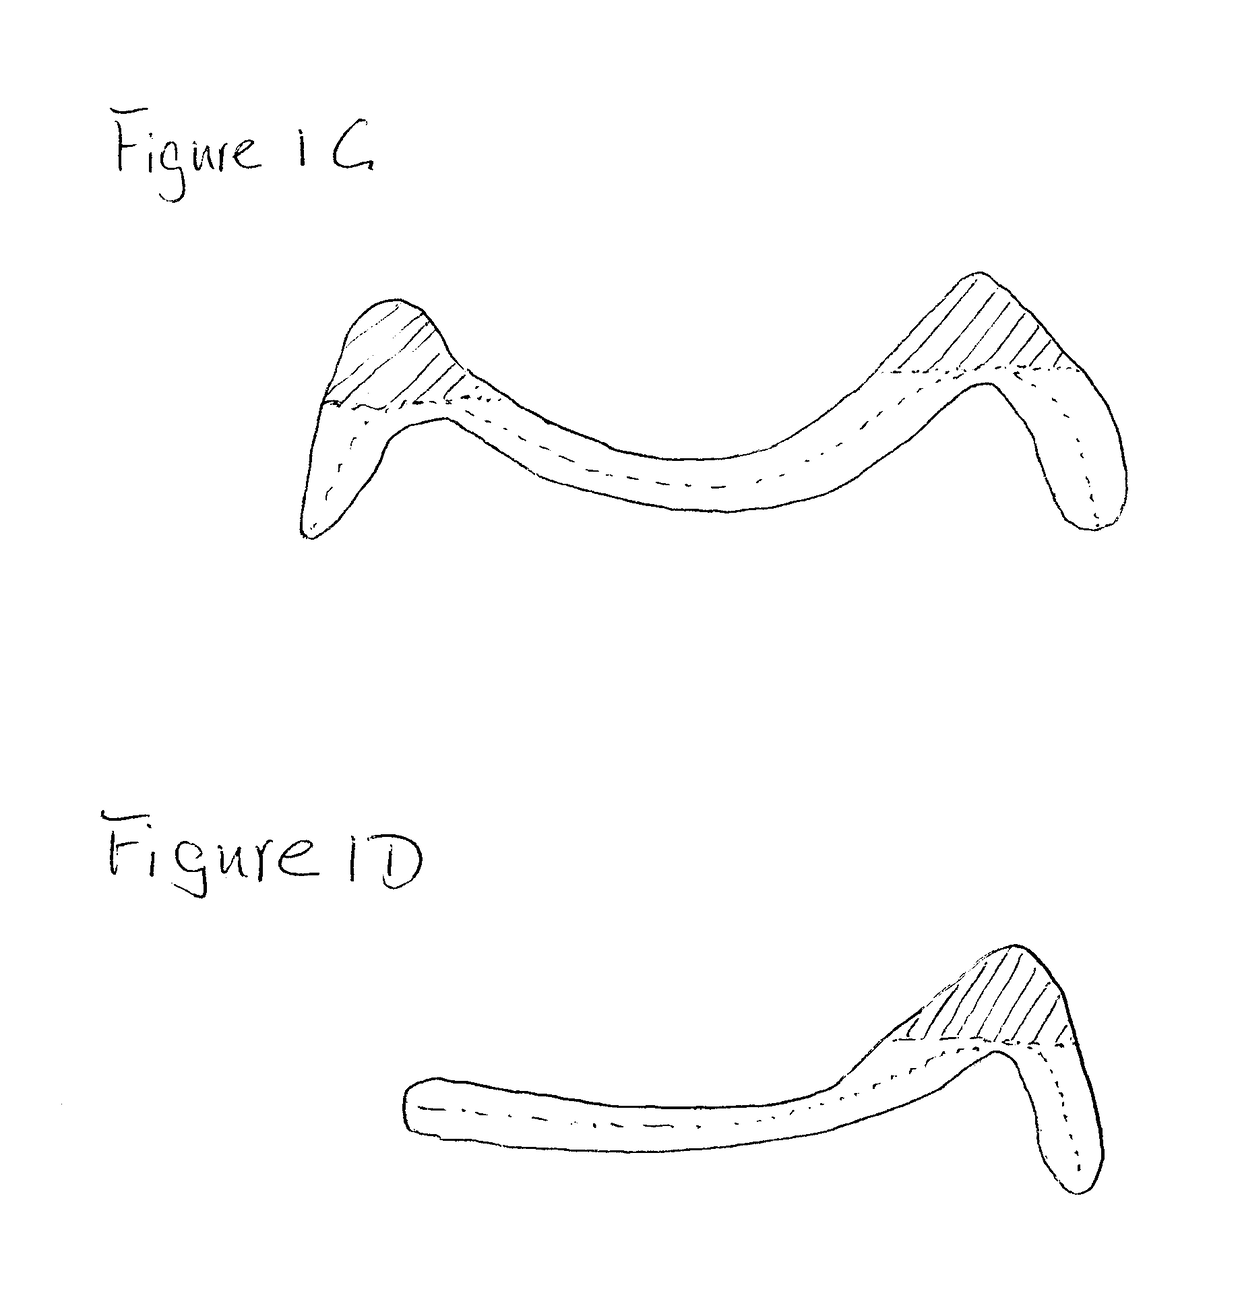 Three dimensional fabricating material systems and methods for producing layered dental products